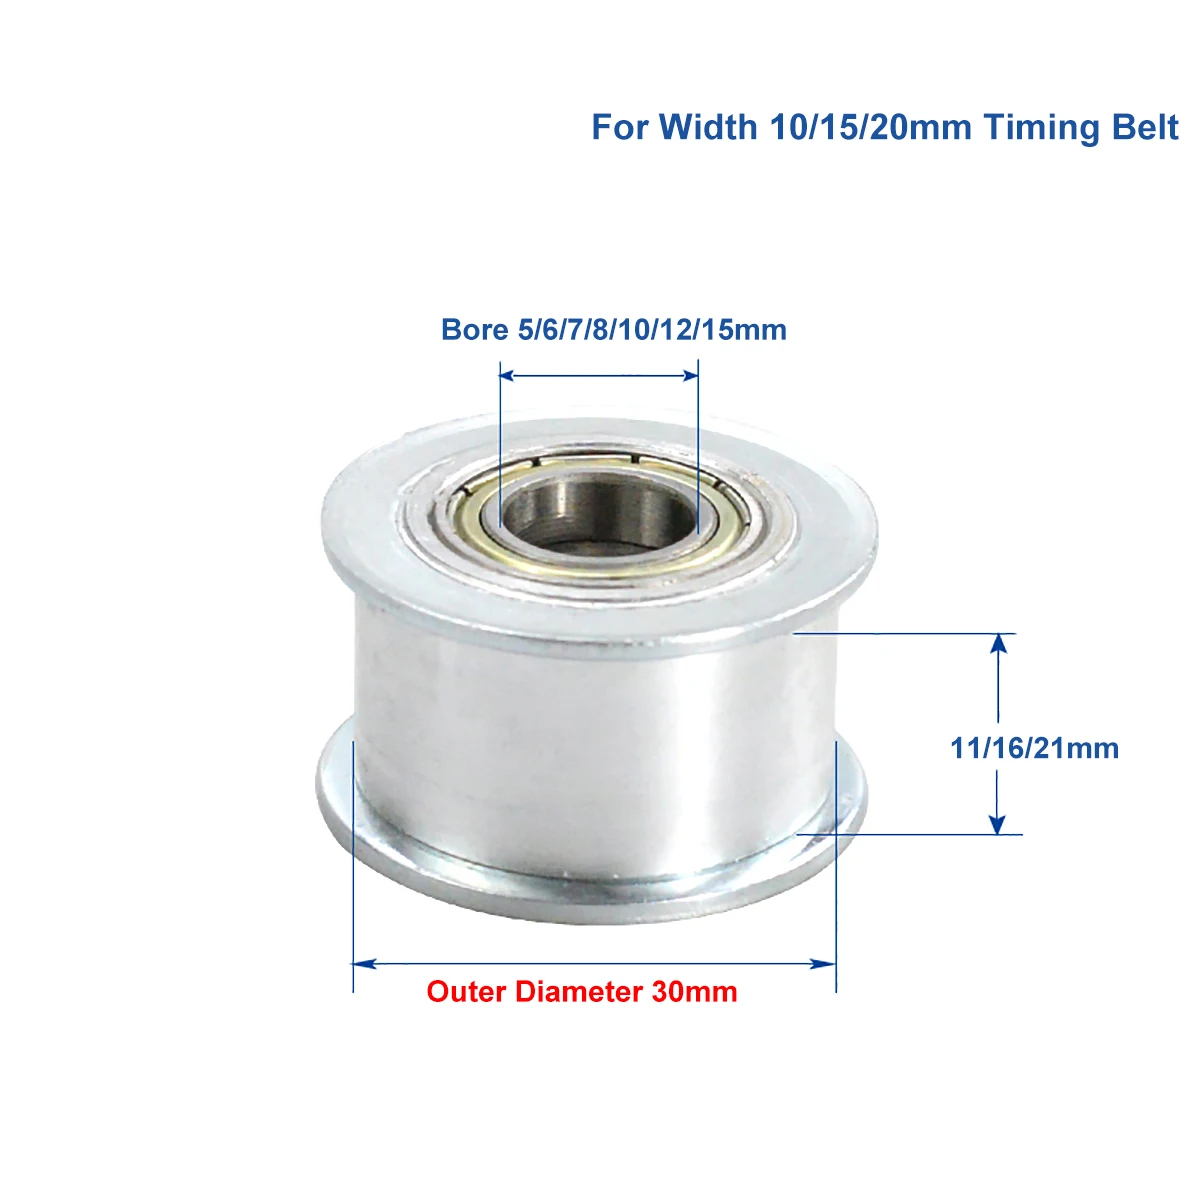 

OD 30mm Idler Timing Pulley For Width 10/15/20mm Timing Belt Bearing Idler Gear Pulley Without Teeth 5/6/7/8/10/12/15mm Bore